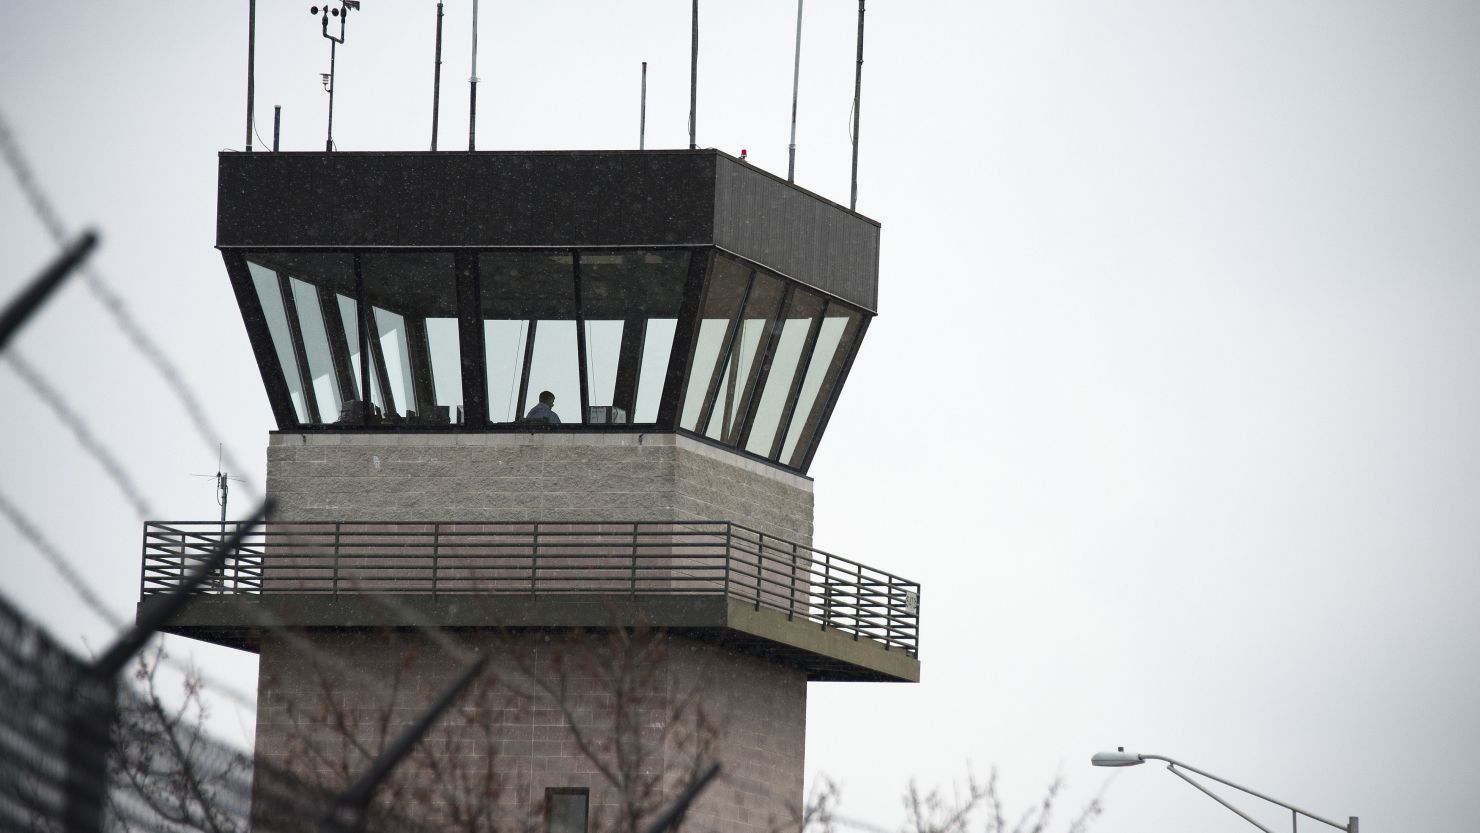 The control tower at Wicomico Regional Airport in Salisbury, Maryland is one of the towers that had been scheduled to close.